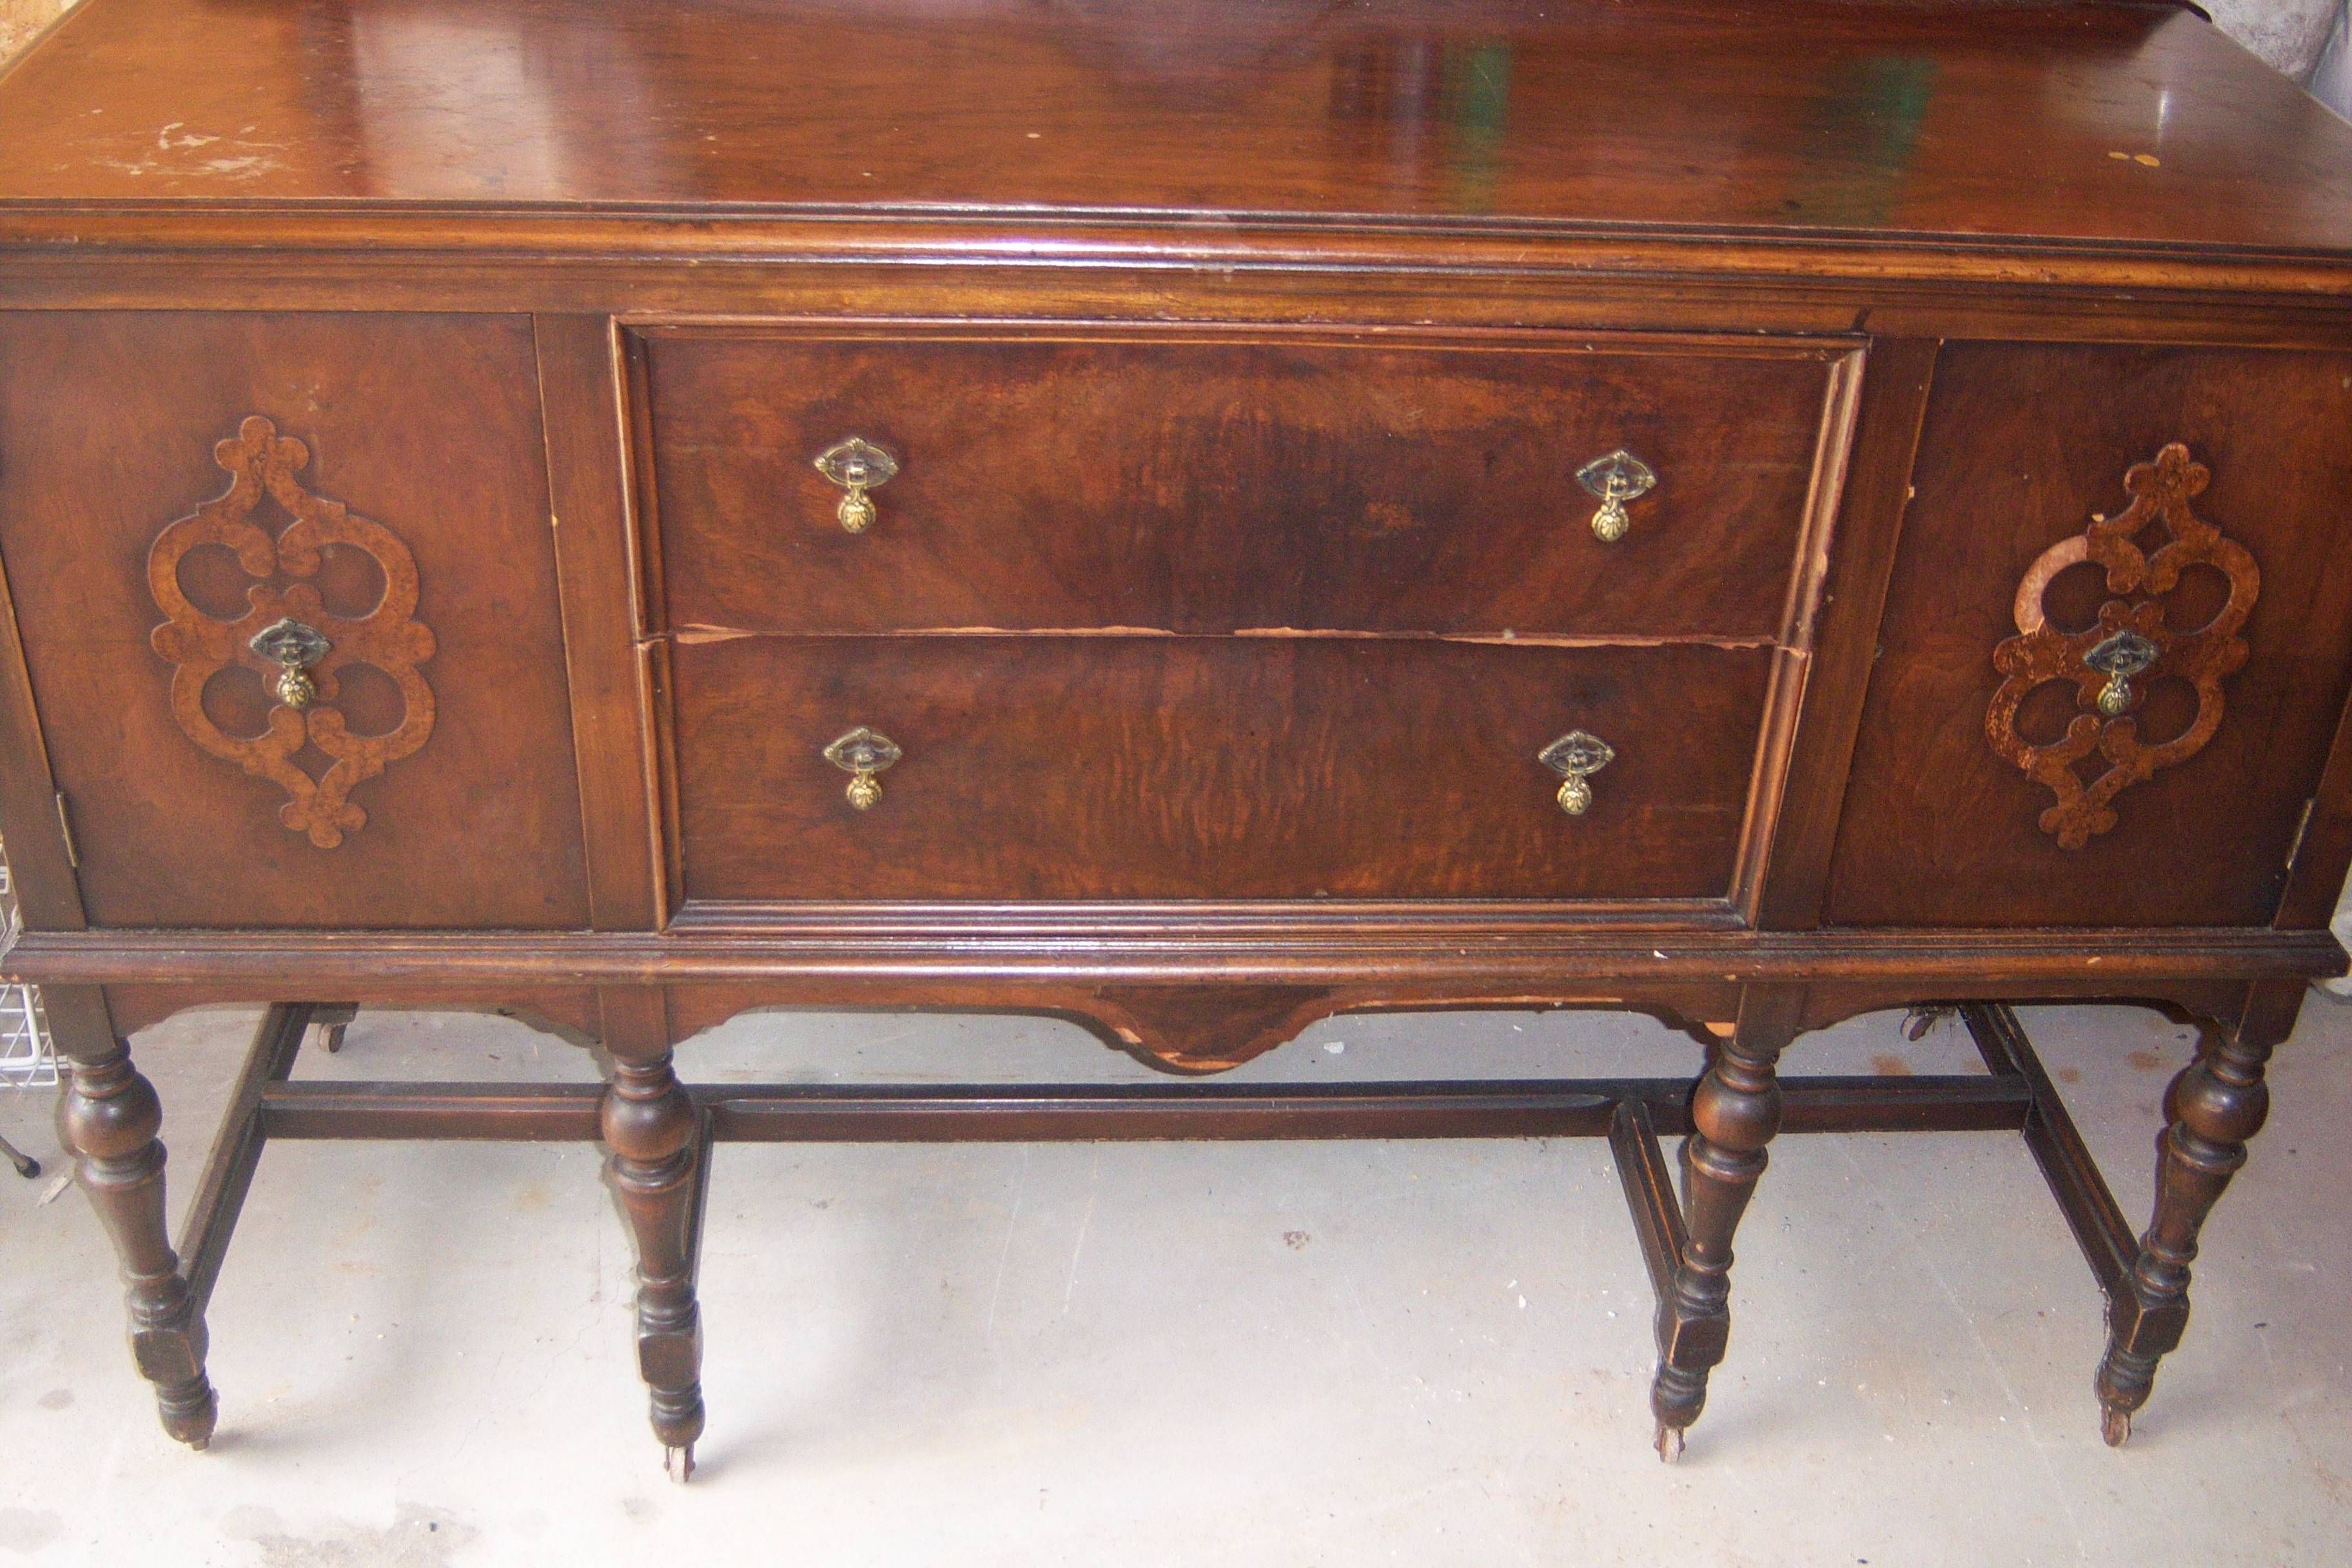 New Antique Sideboard Buffet Bjdgjy Intended For Most Recent Jacobean Sideboards Buffets 